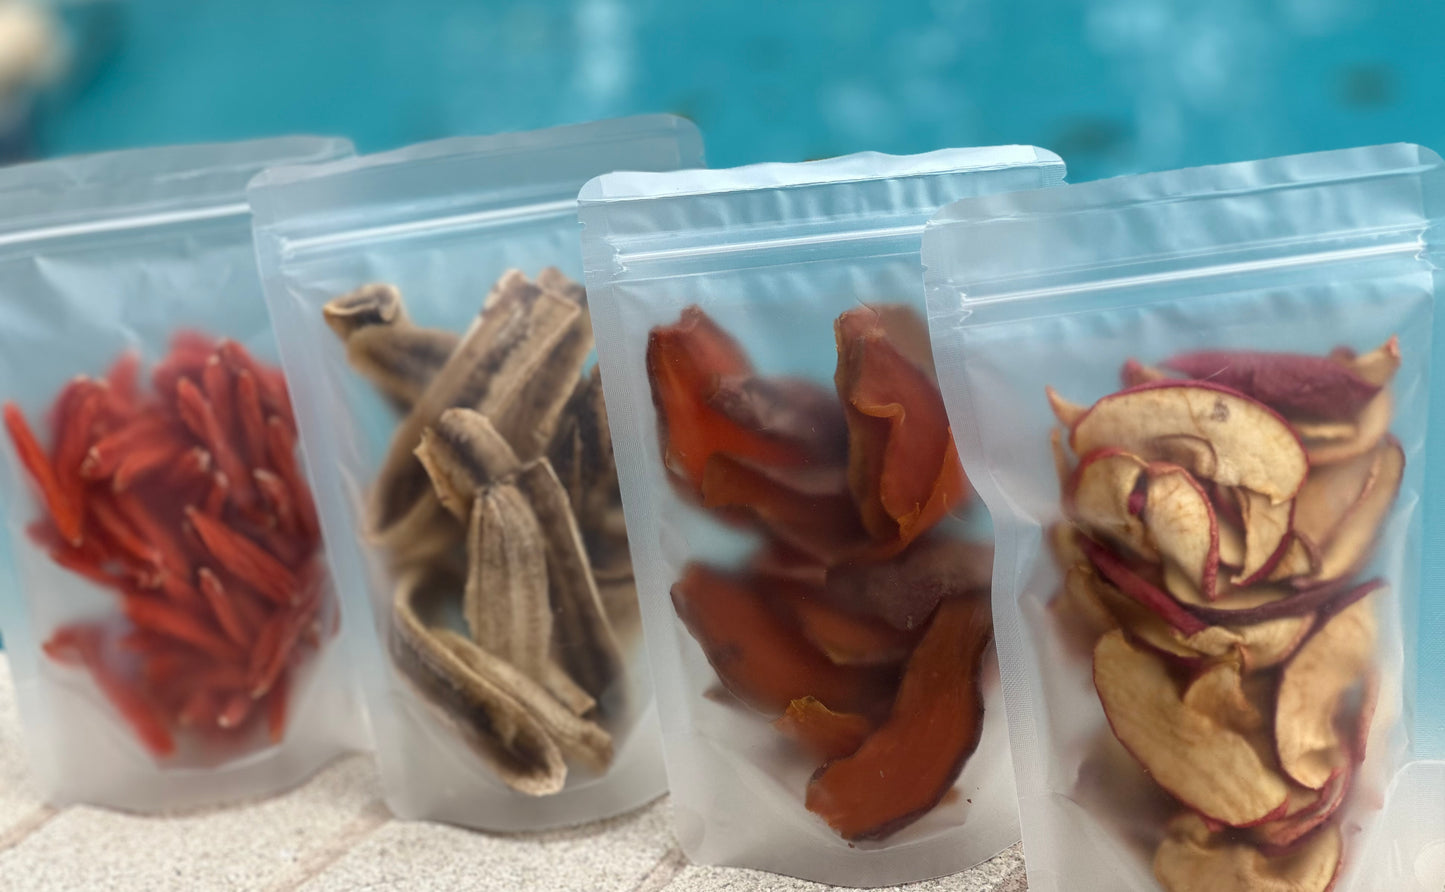 4 pack special!!! Apple bites, banana strips, sweet potato jerky and carrot nibbles